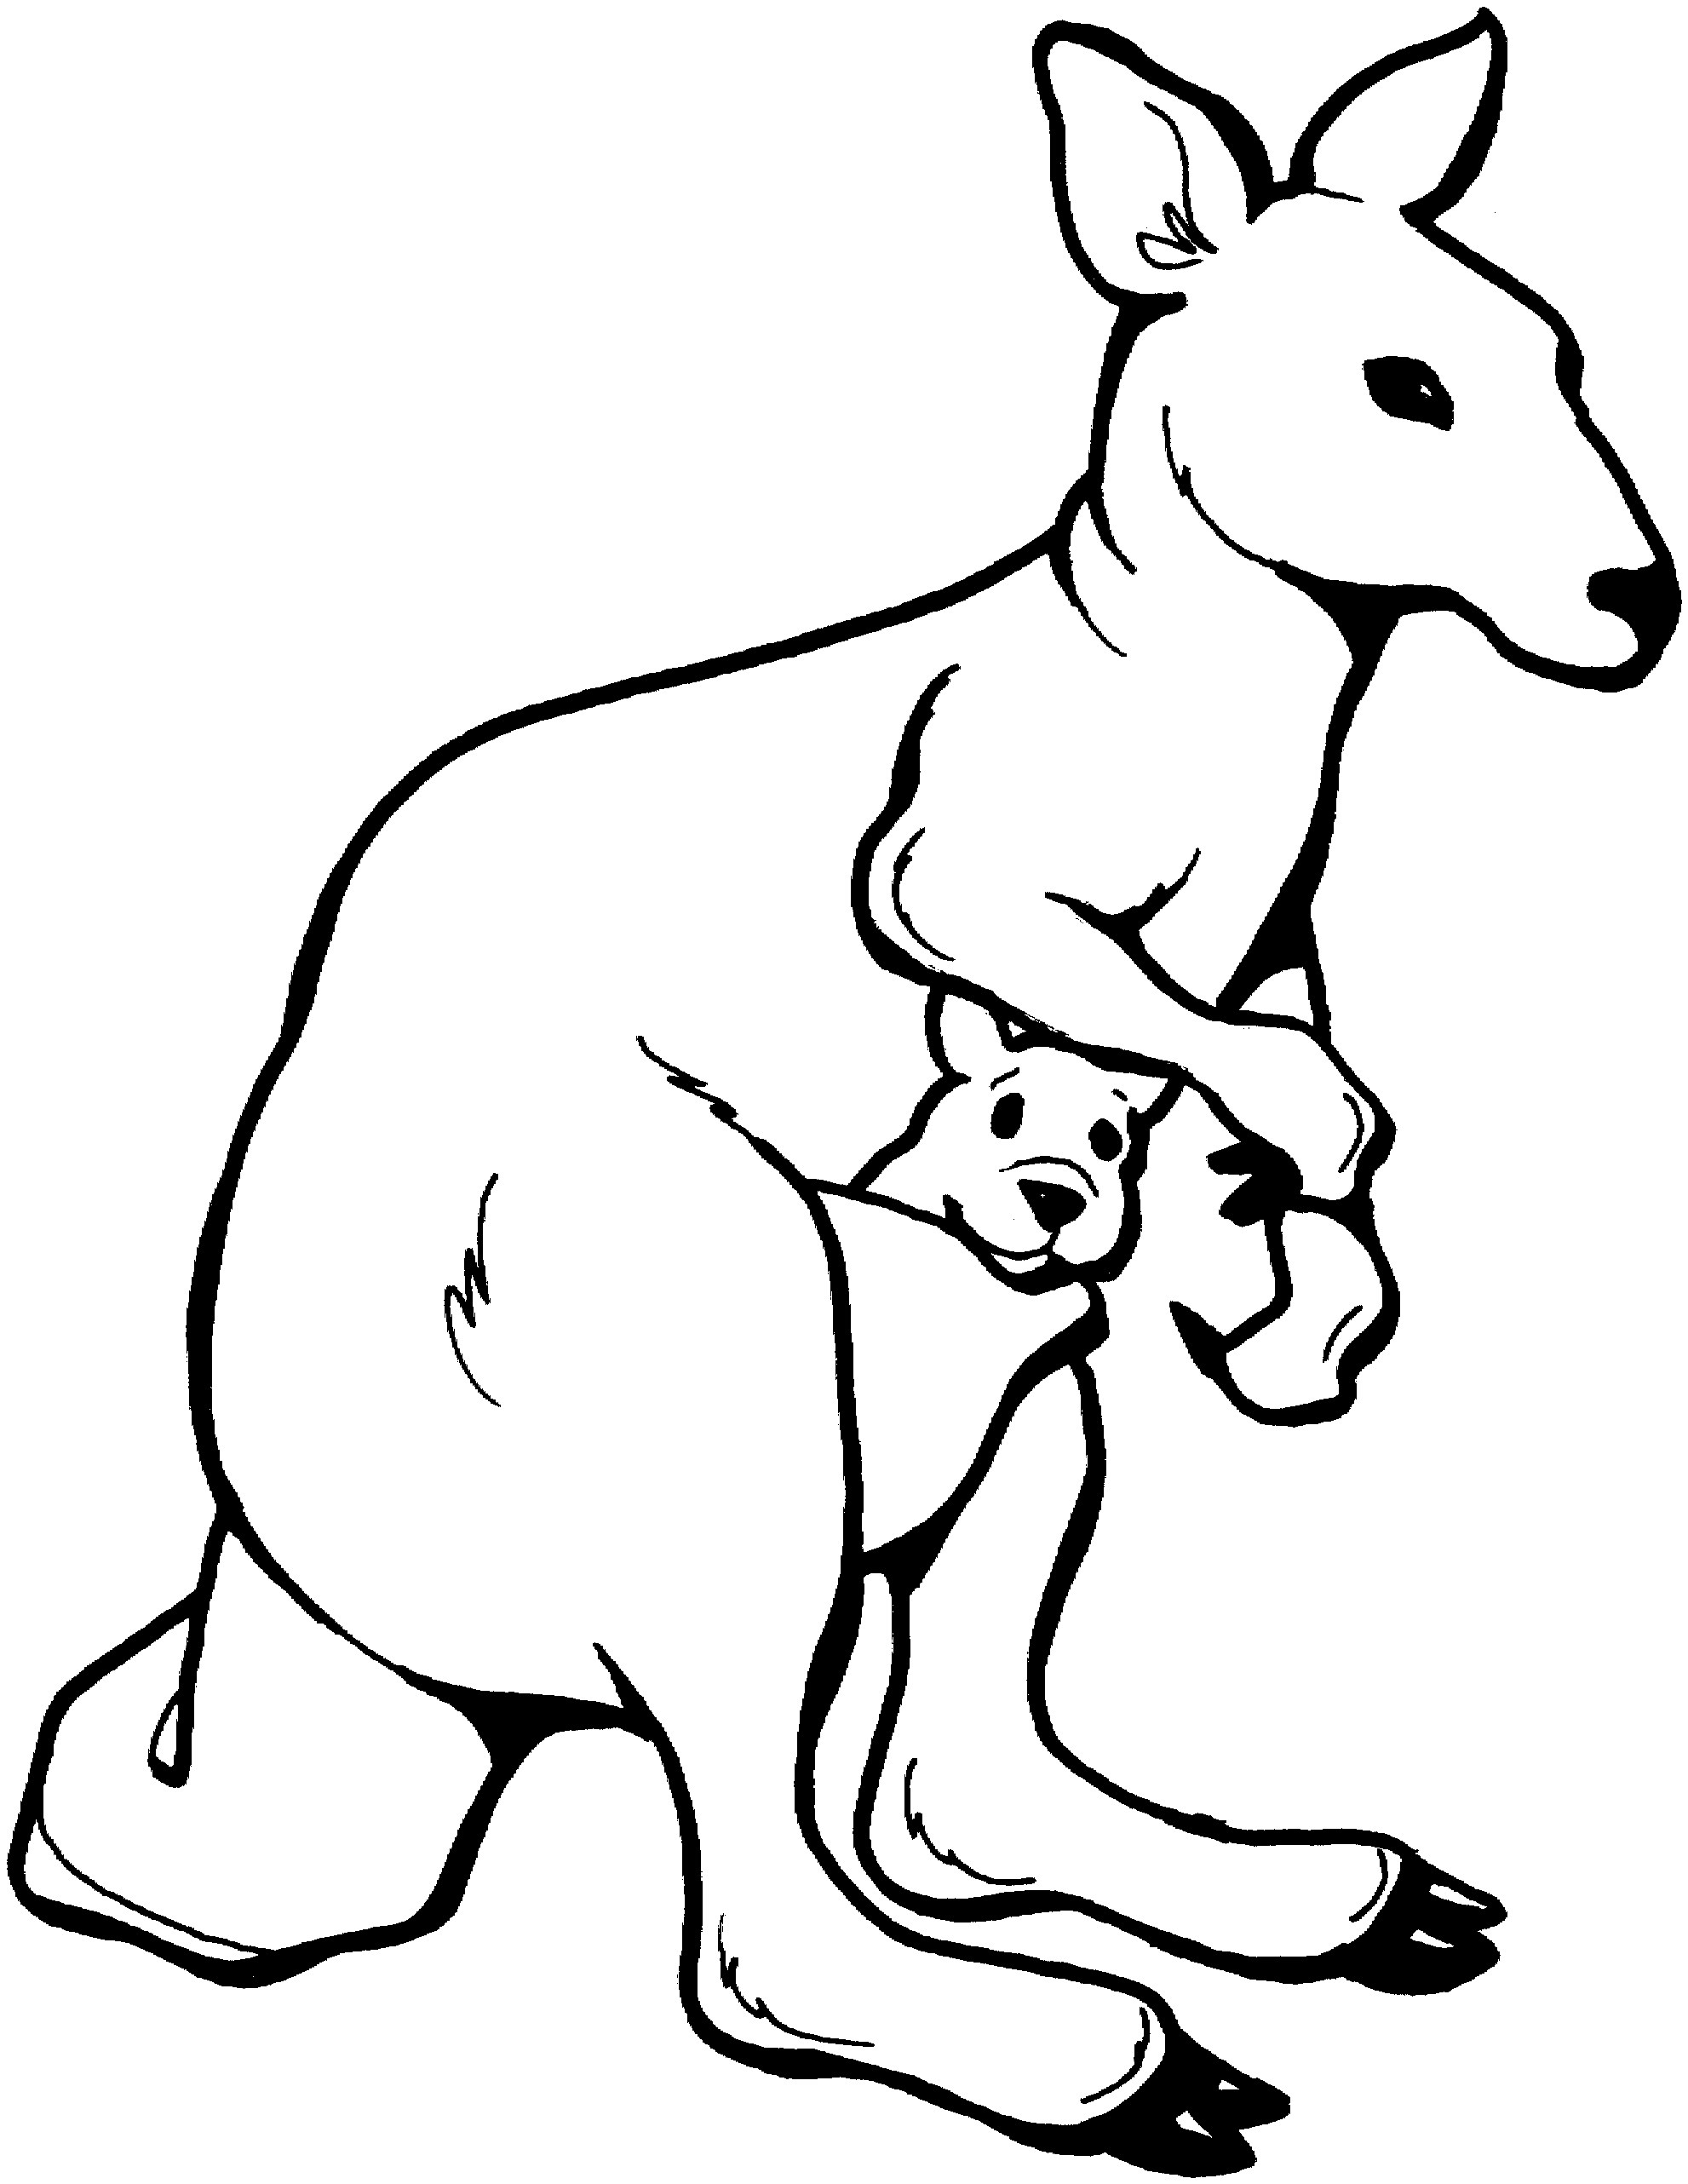 Black and White Kangaroo Logo - Clip Art Black And White Pics Of A Joey Clipart